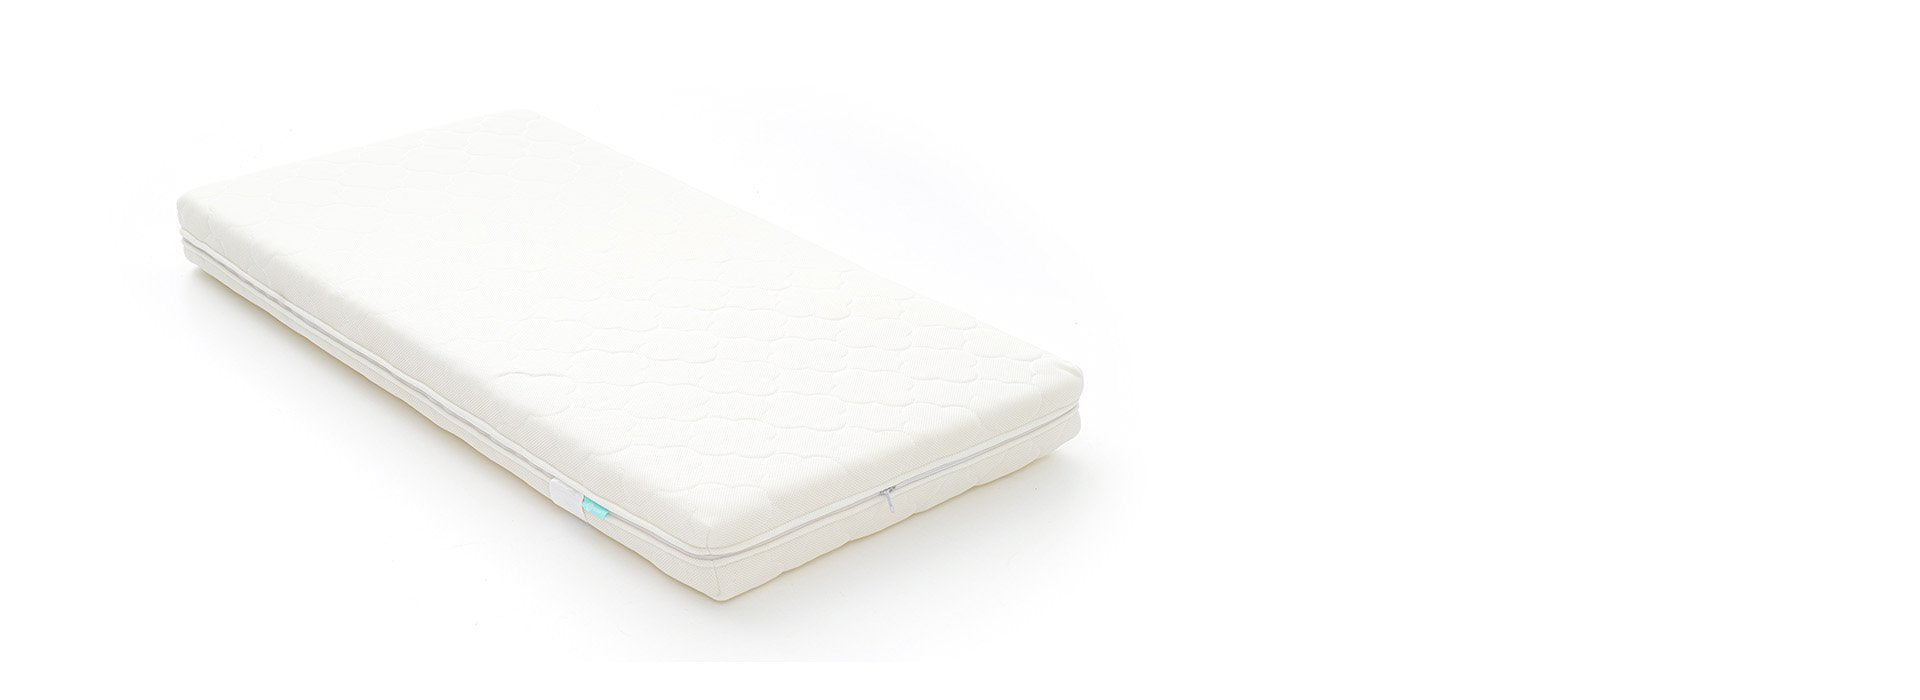 Baby mattress, left side angle view.